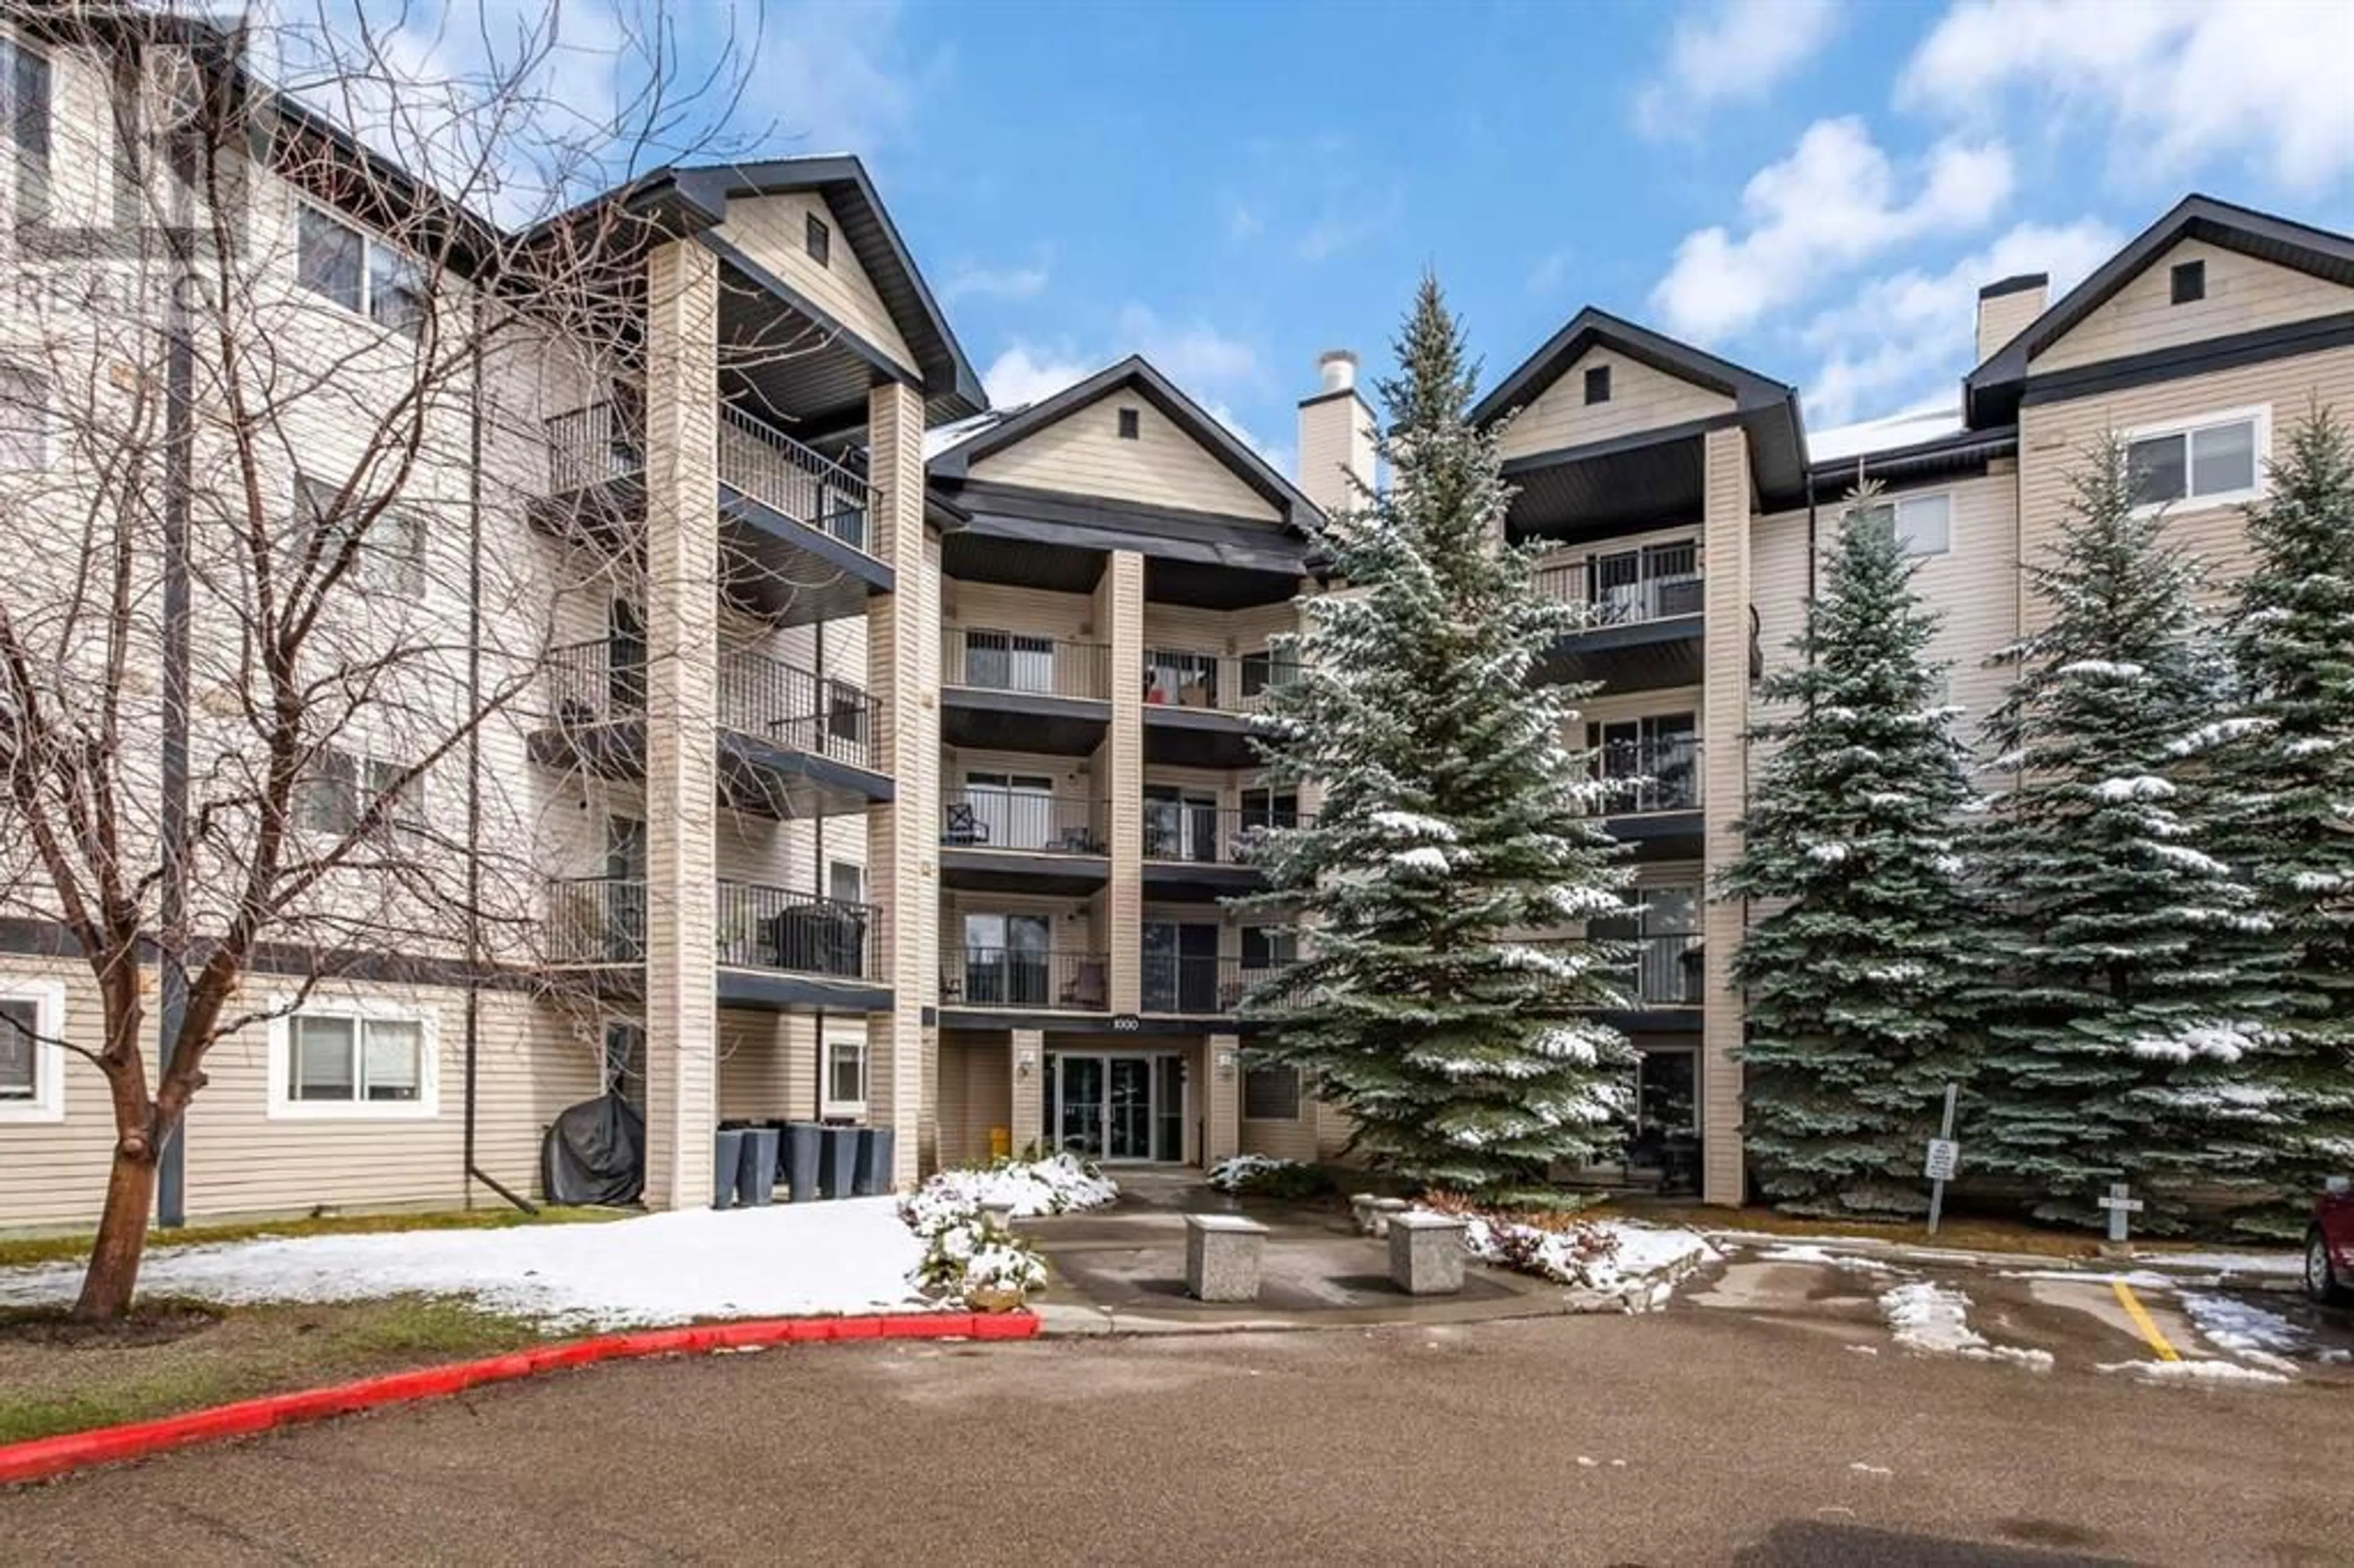 A pic from exterior of the house or condo for 1206 4975 130 Avenue SE, Calgary Alberta T2Z4M4